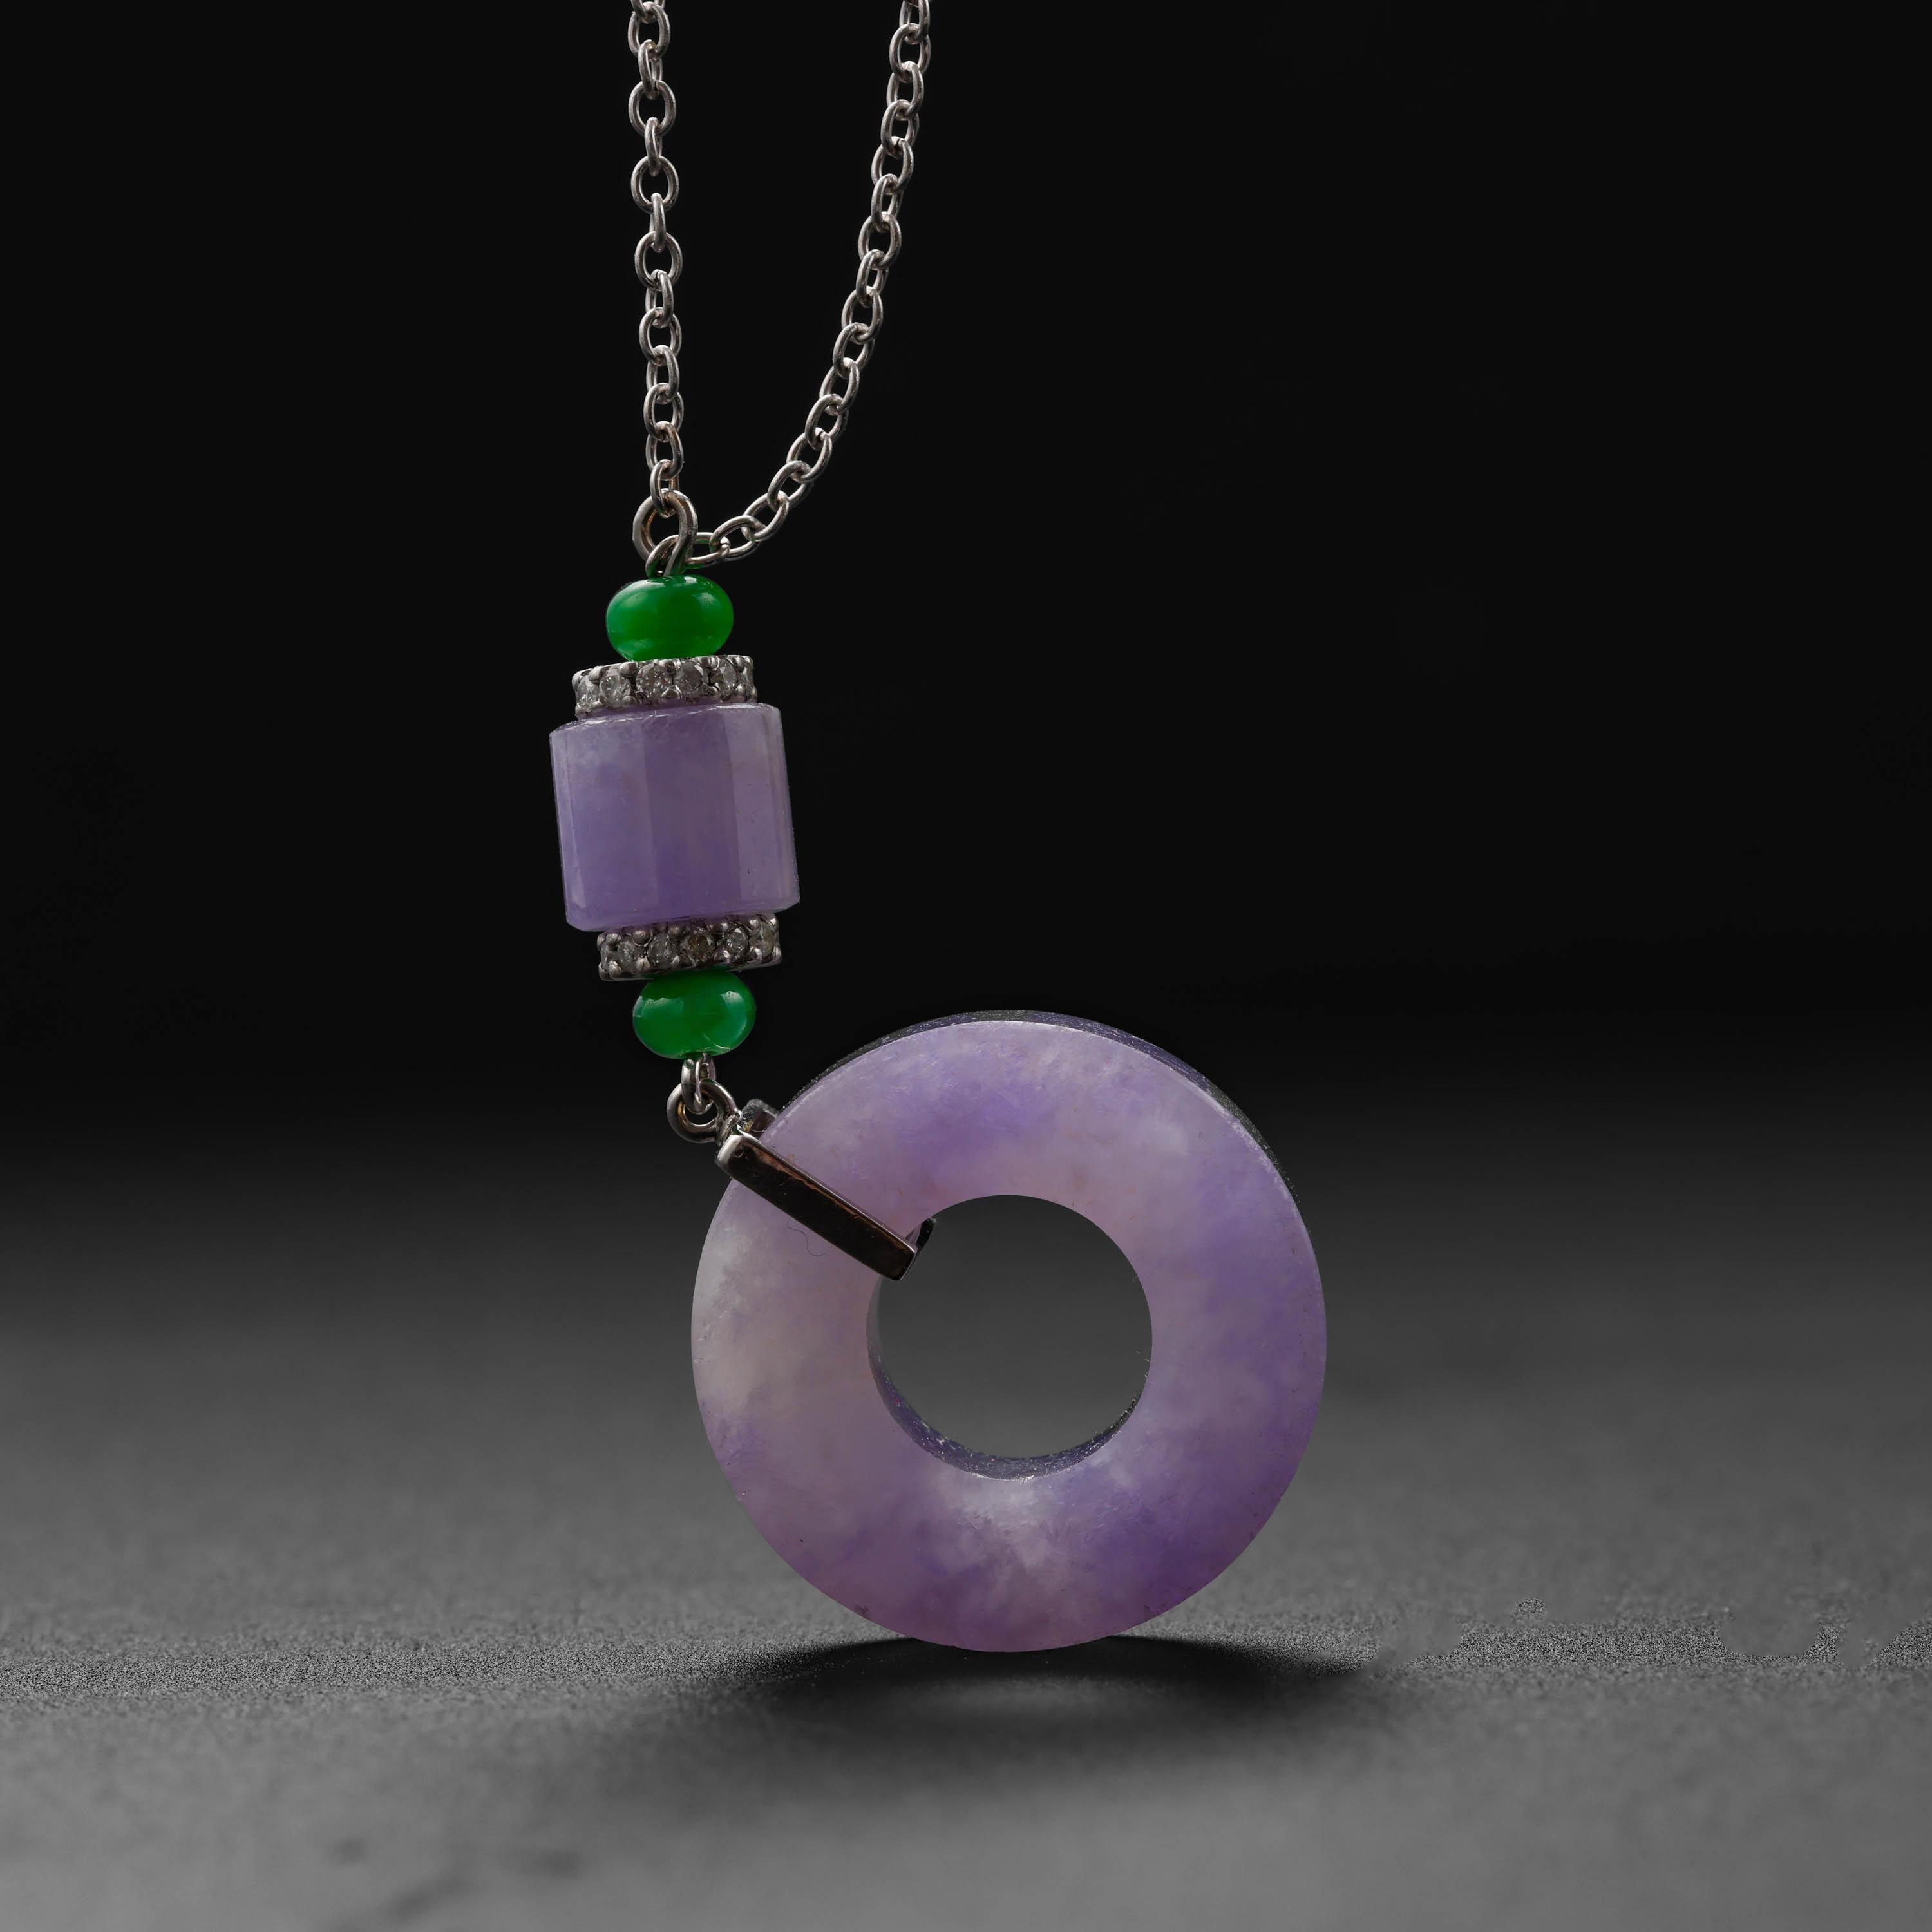 Utterly magnificent, this rich lavender jade pendant features a light purple Burmese jadeite circle that measures approximately 21mm x 5mm. The disk is suspended from a 14k white gold bail set with white diamonds, allowing the disk to dangle freely